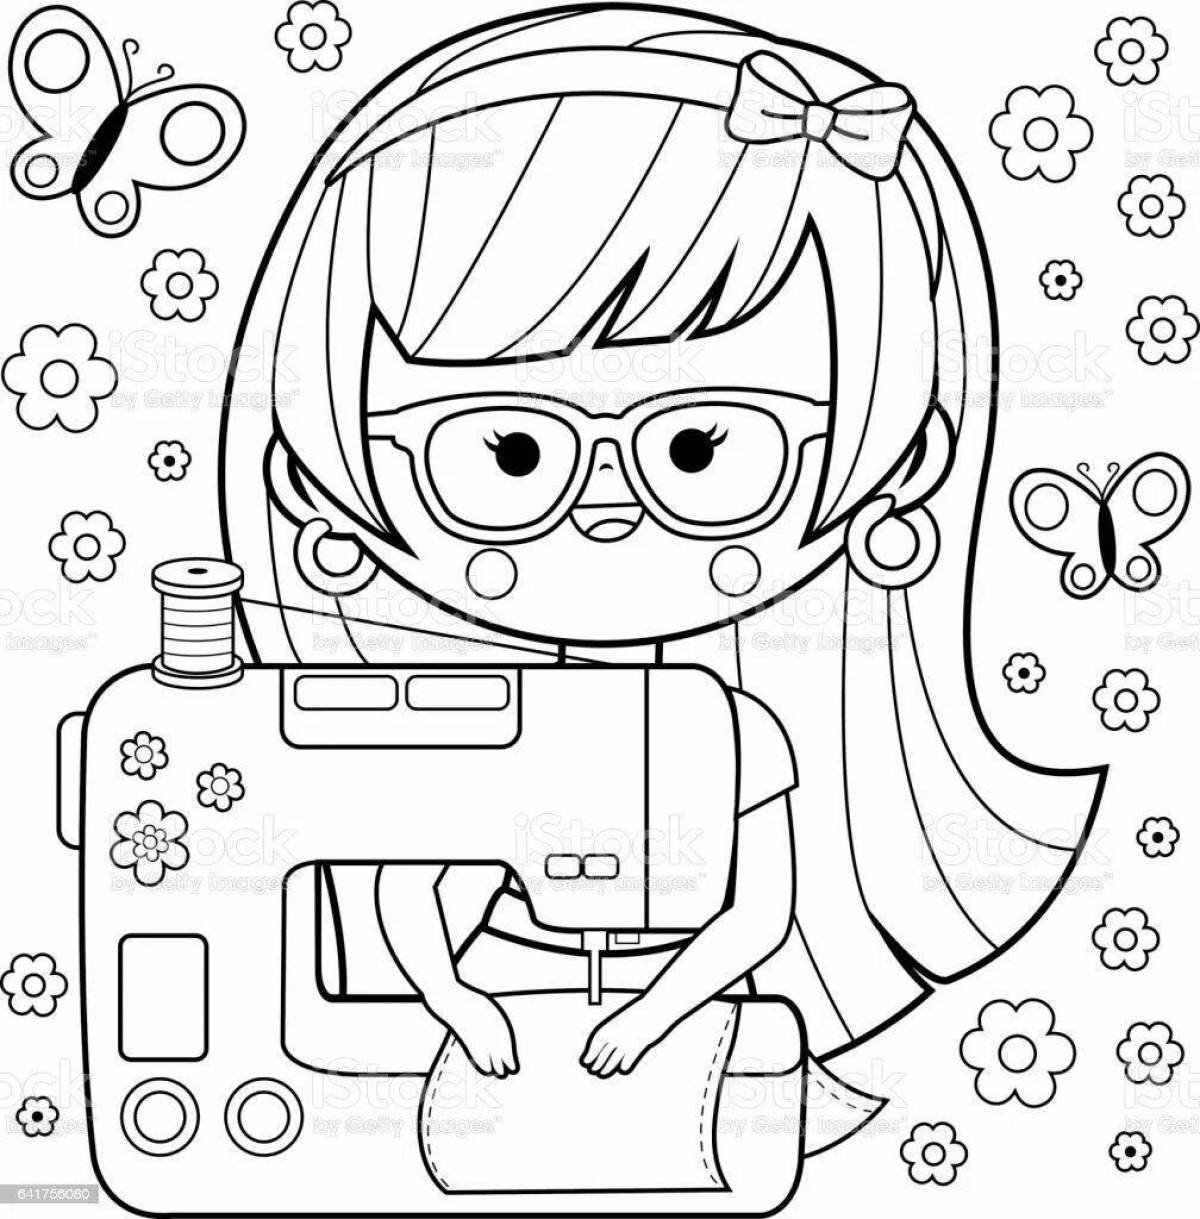 Playful seamstress coloring book for toddlers